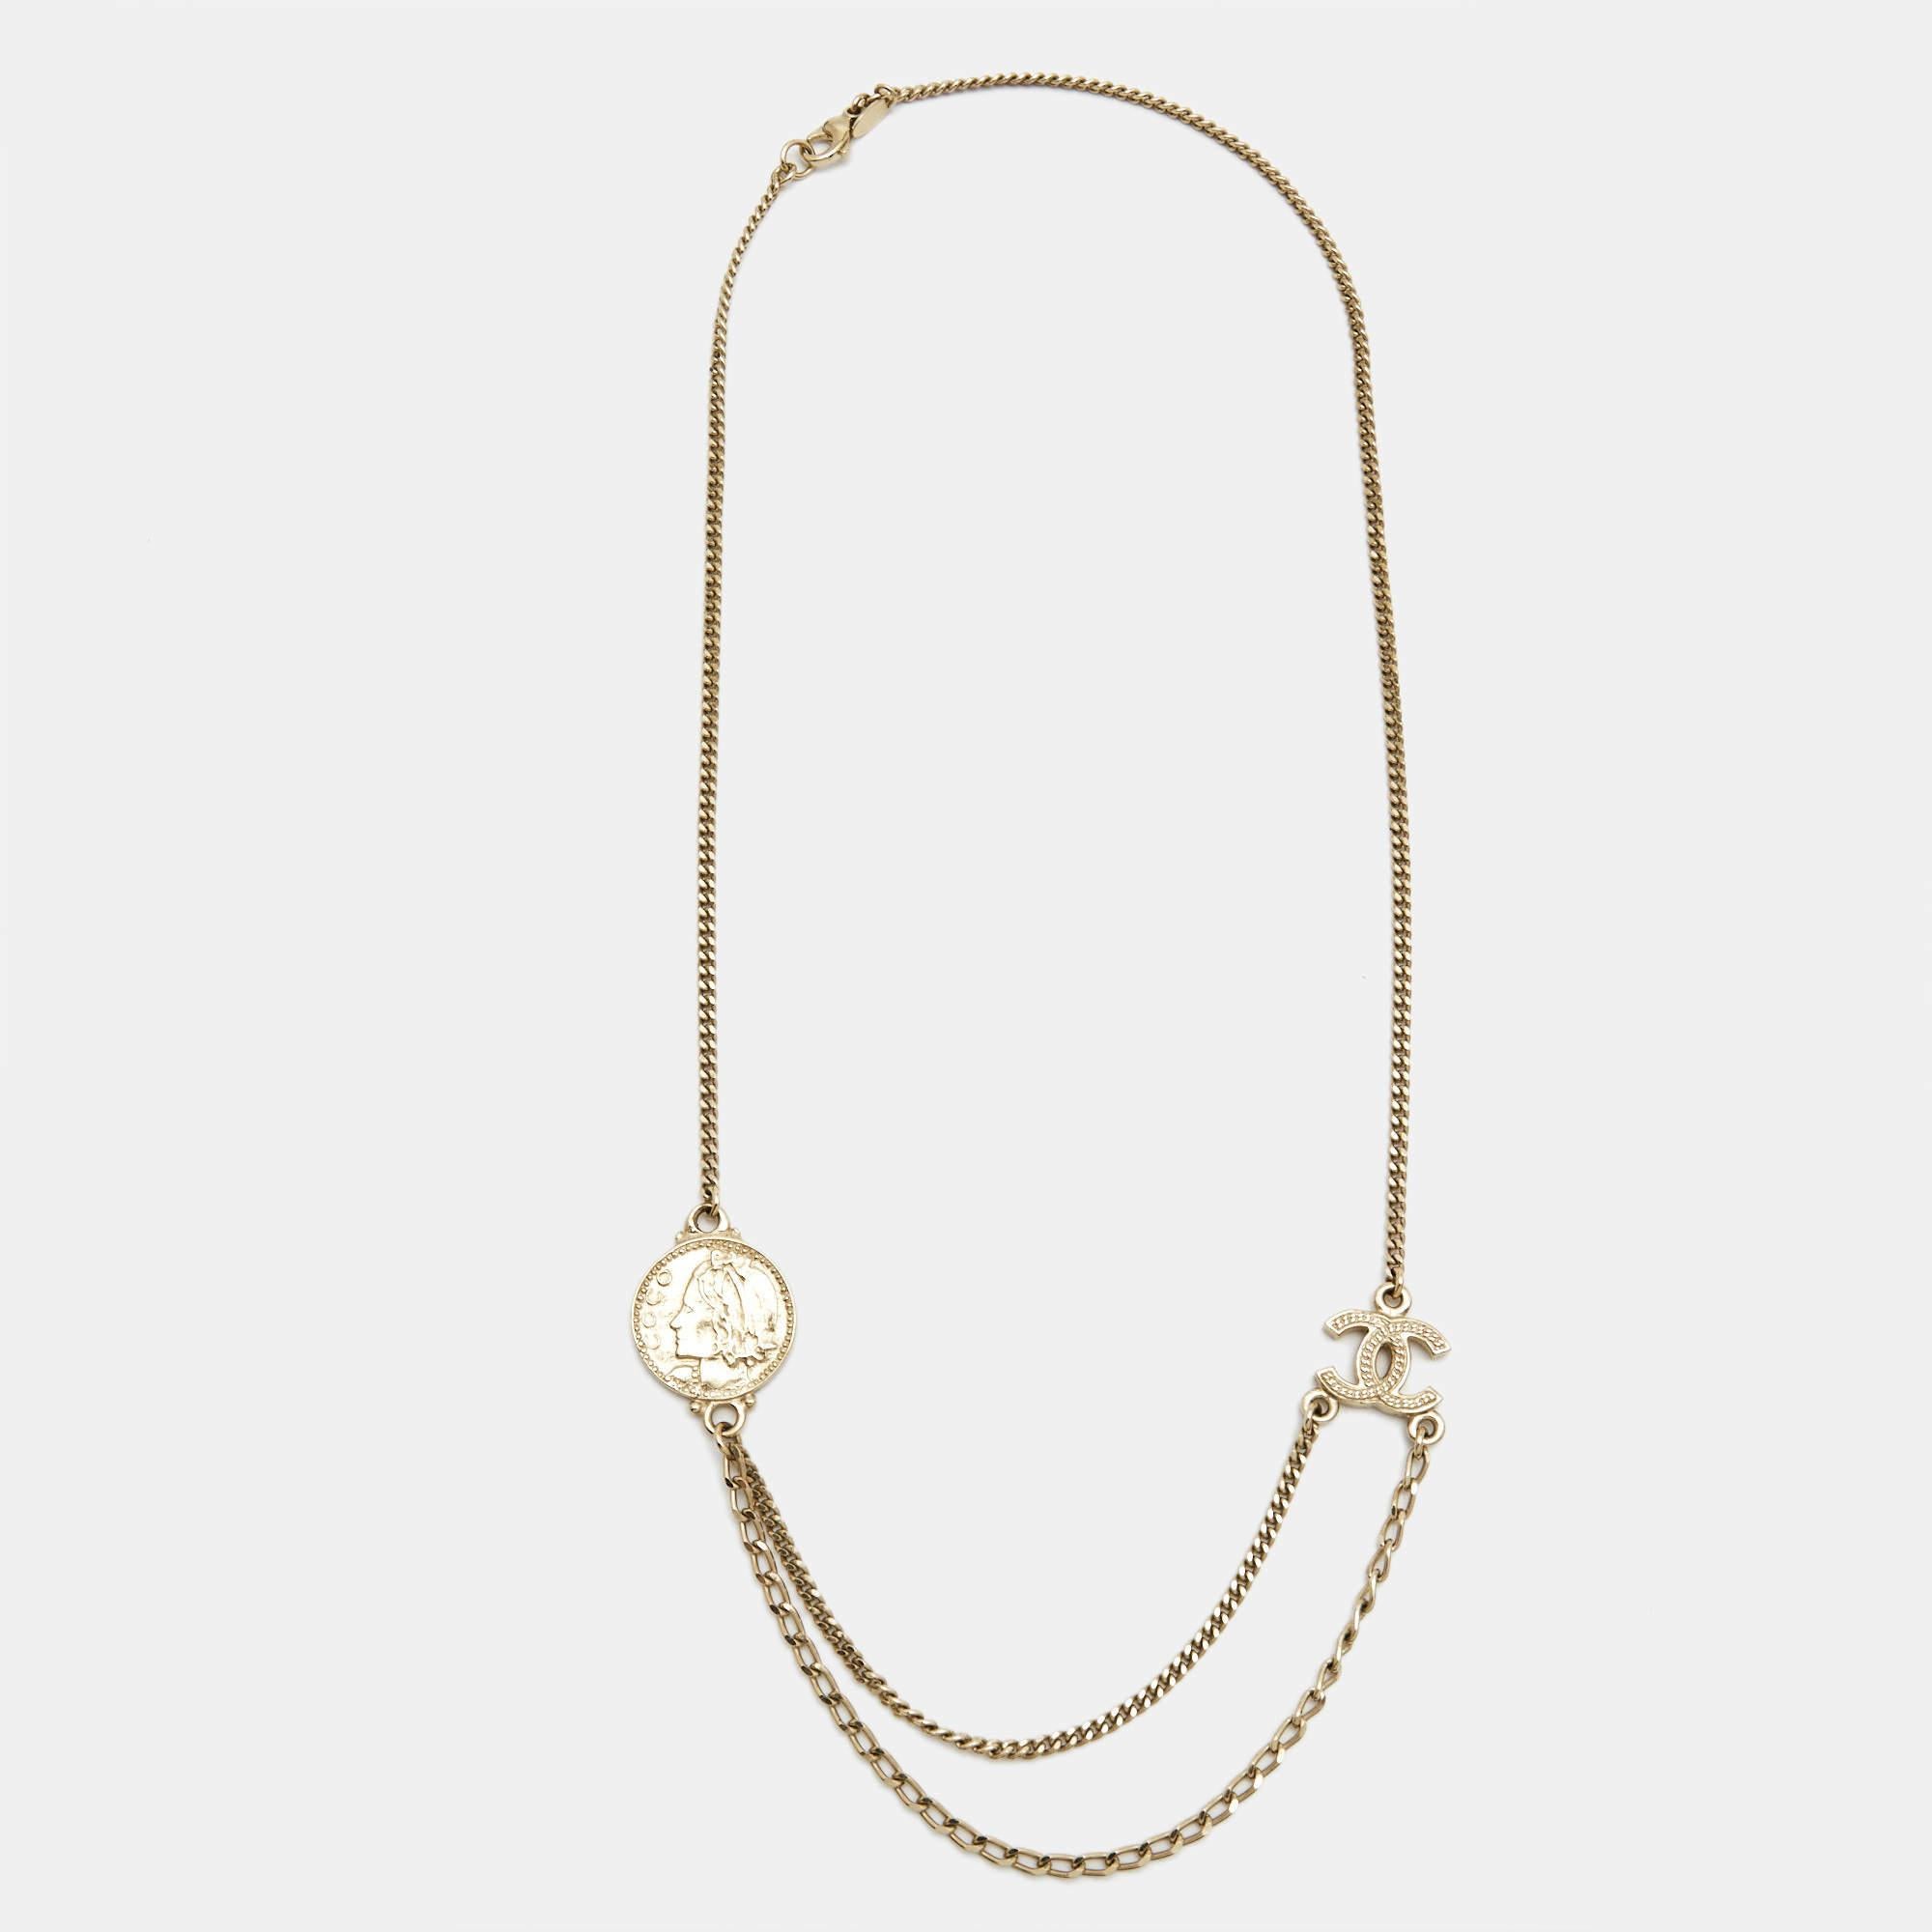 The Chanel CC Coco necklace is an exquisite piece of jewelry. It features a gold-tone chain with the iconic Chanel logo, the double 'C' interlocking design, and Coco Chanel's profile. This timeless necklace adds a touch of elegance and luxury to any